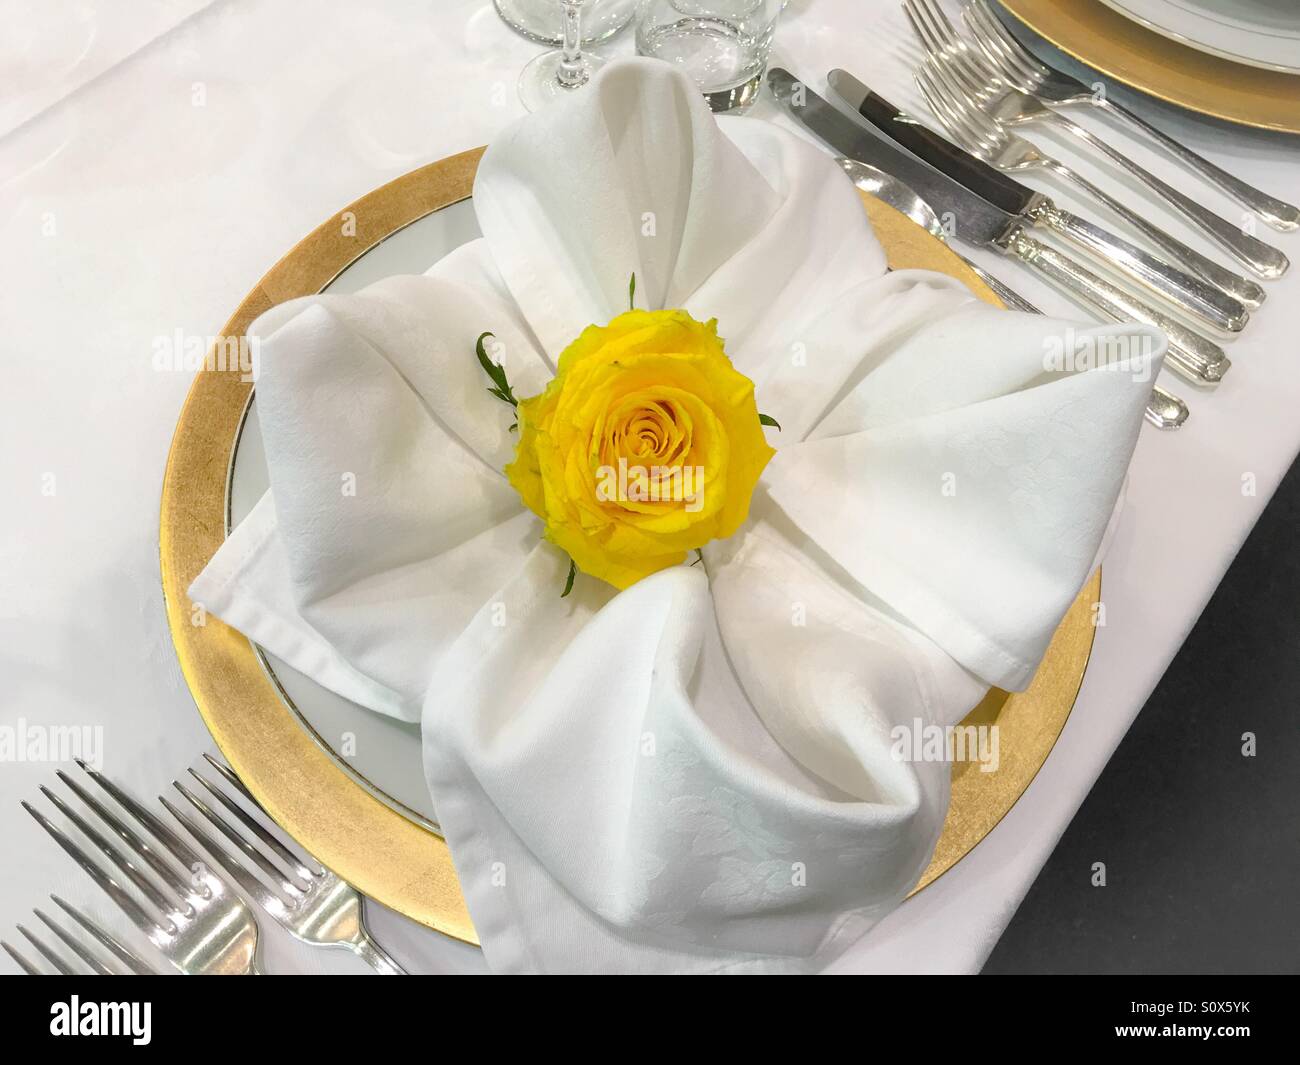 Table place setting with yellow rose in centre Stock Photo